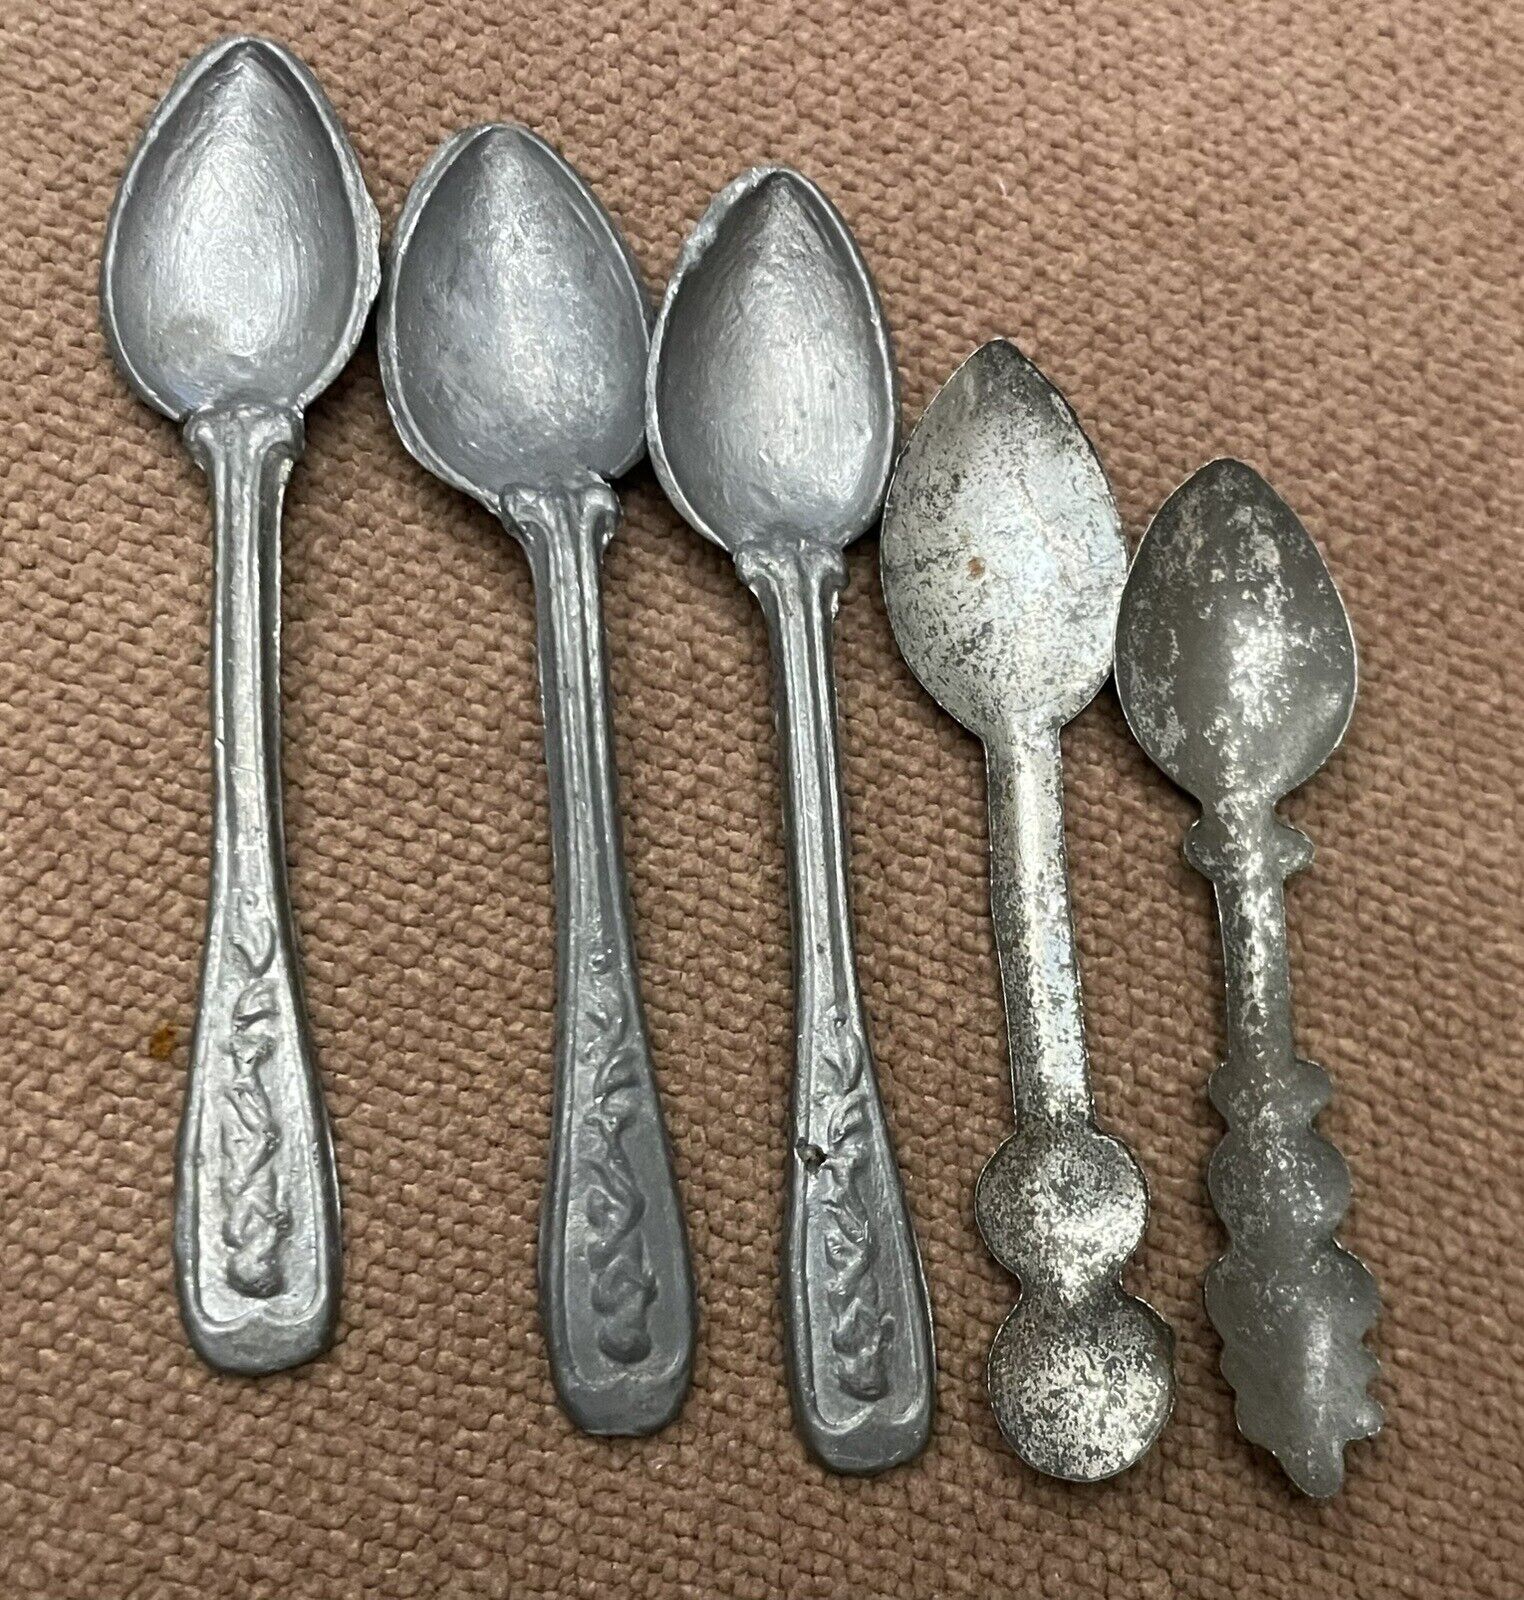 VINTAGE /POSSIBLY ANTIQUE  MINIATURE METAL (POSSIBLY PEWTER) SPOONS  